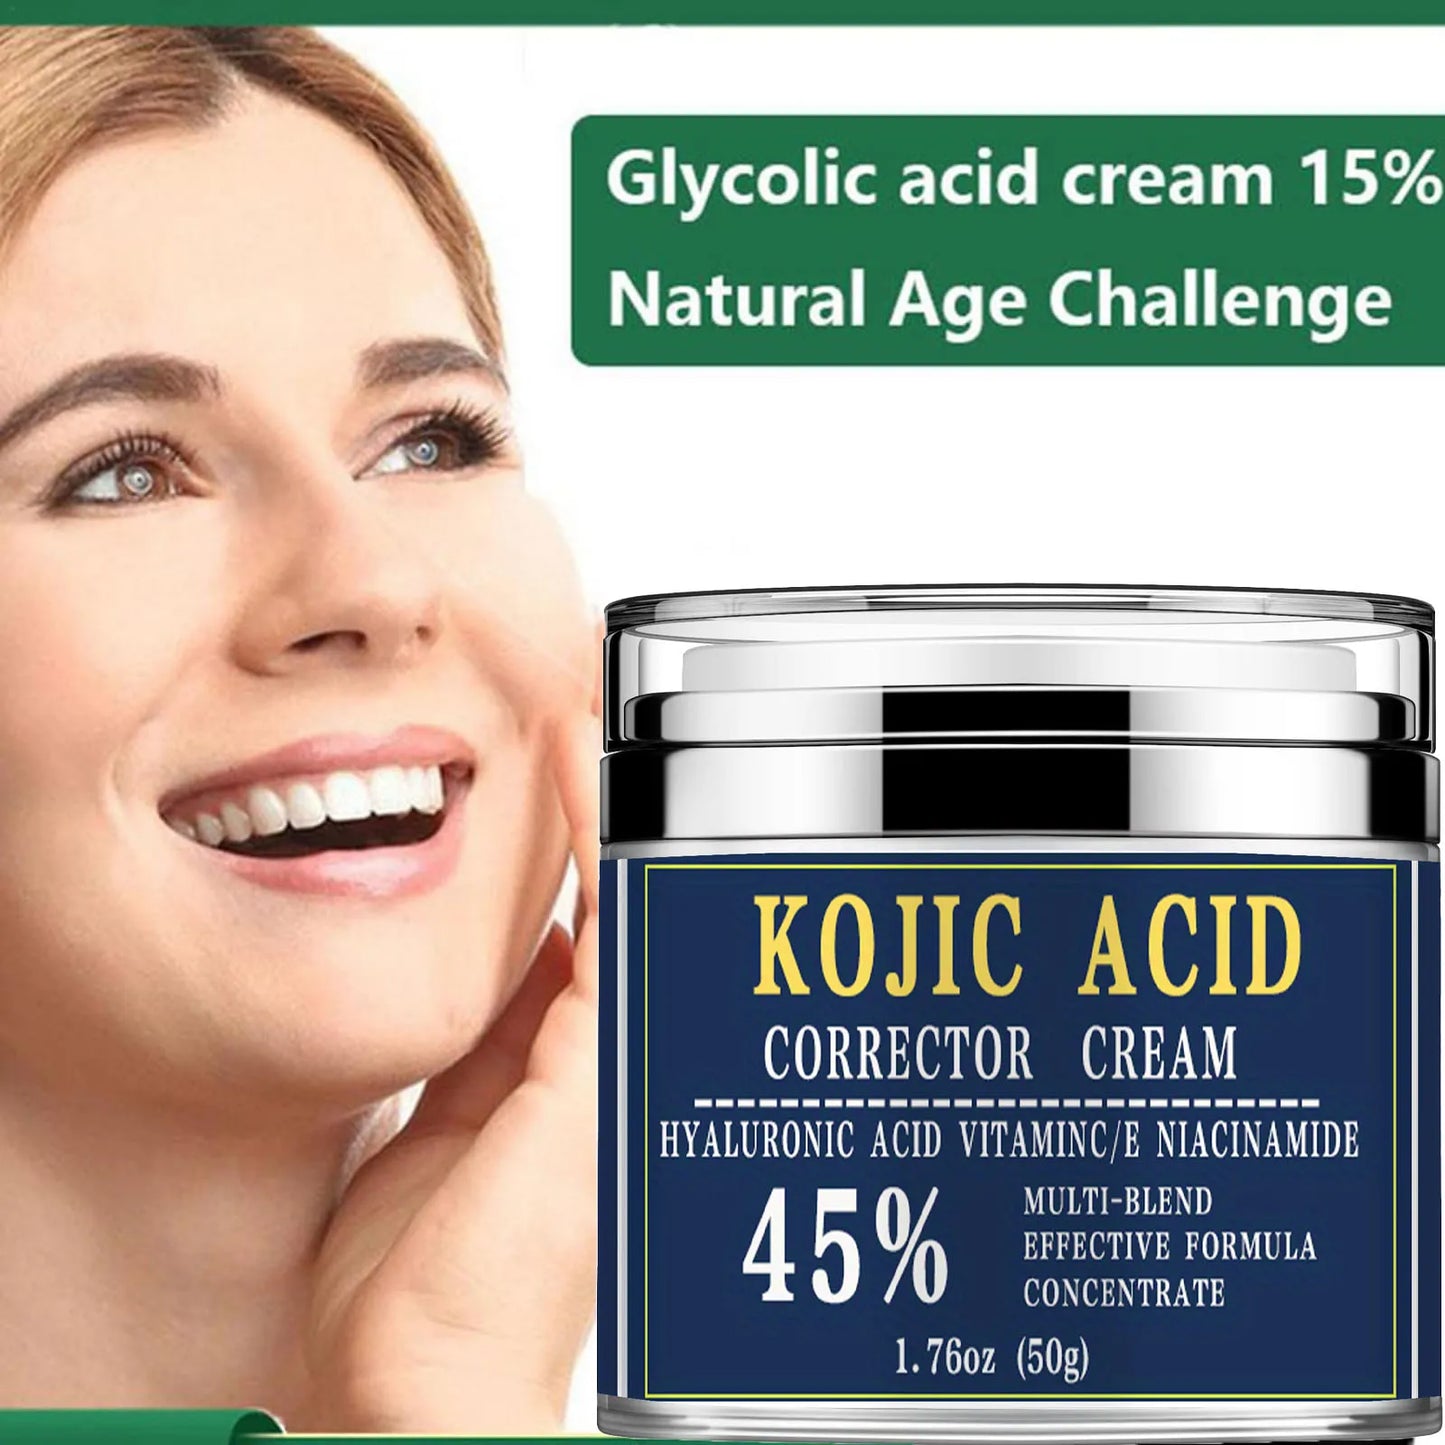 Glycolic Acid Cream with 15% Lifting & Firming Face Cream Hydrates & Moisturizes Improve Dark Spot Sagging Skin Fades Fine Lines